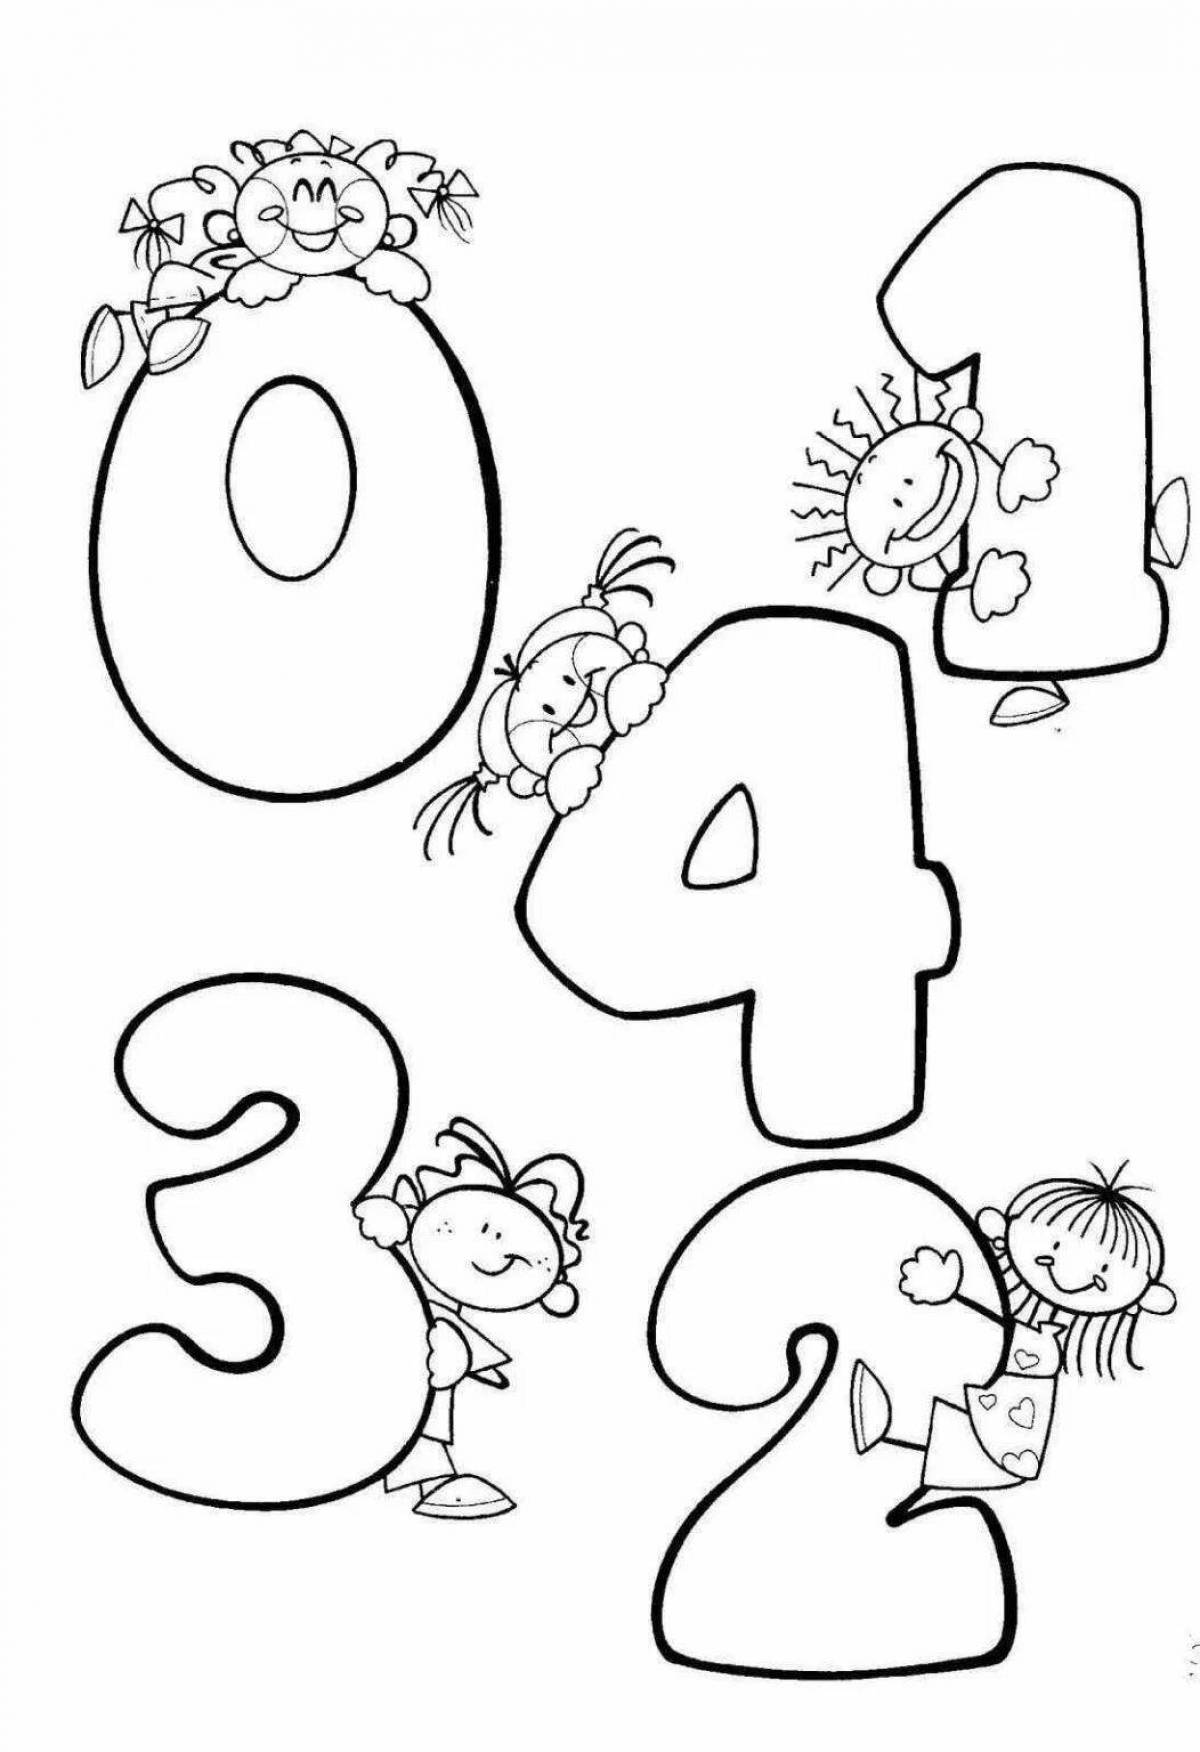 Fun coloring number 4 for kids